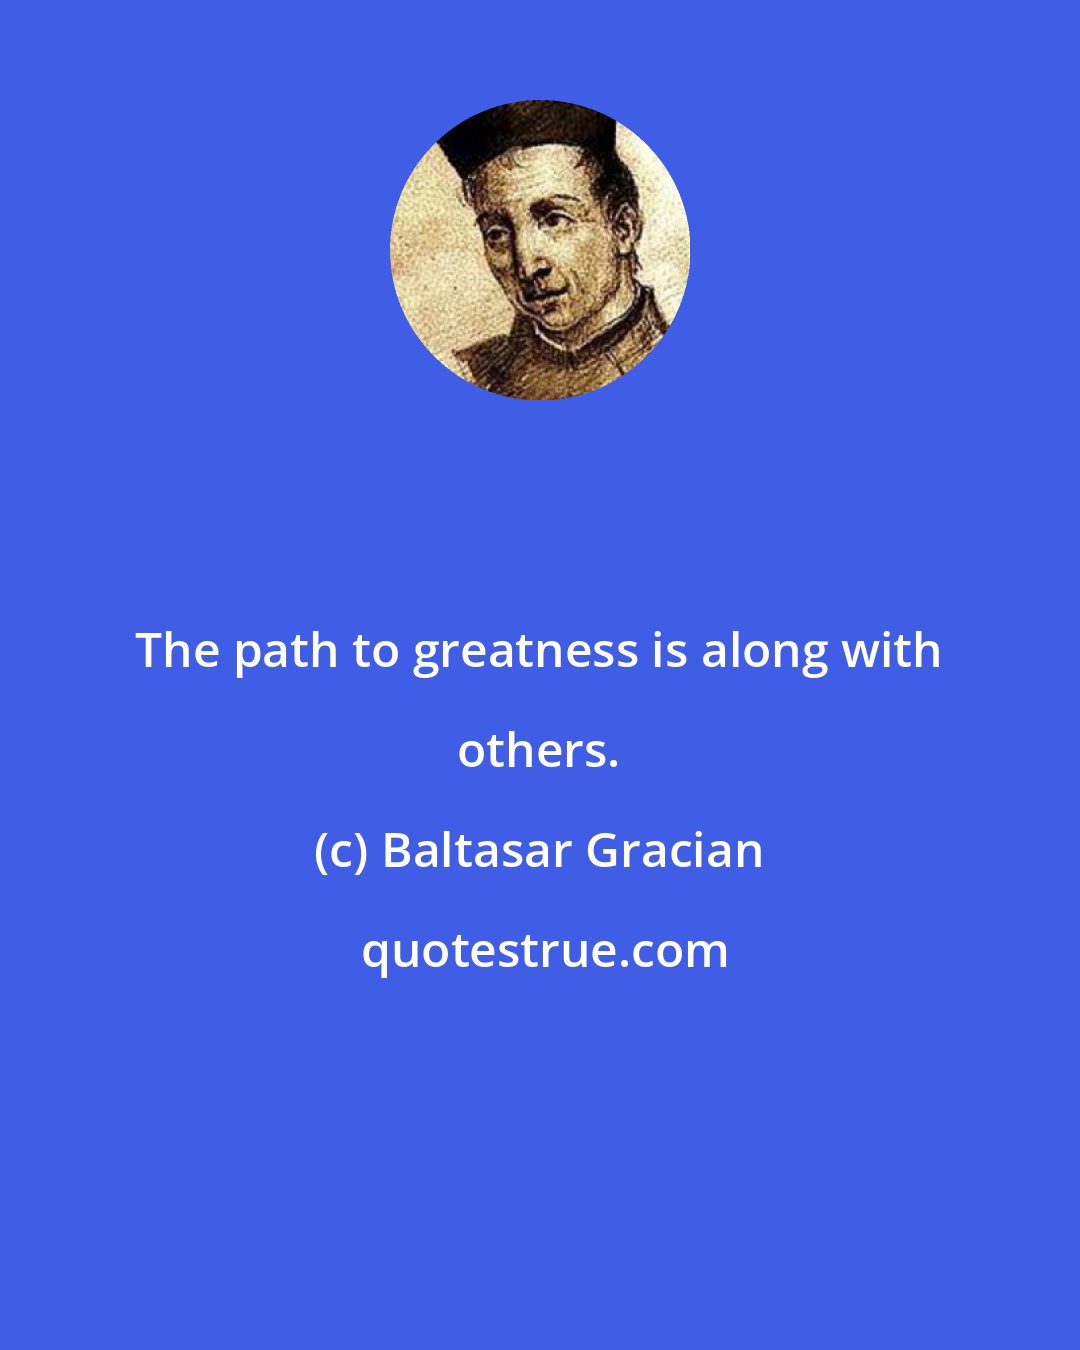 Baltasar Gracian: The path to greatness is along with others.